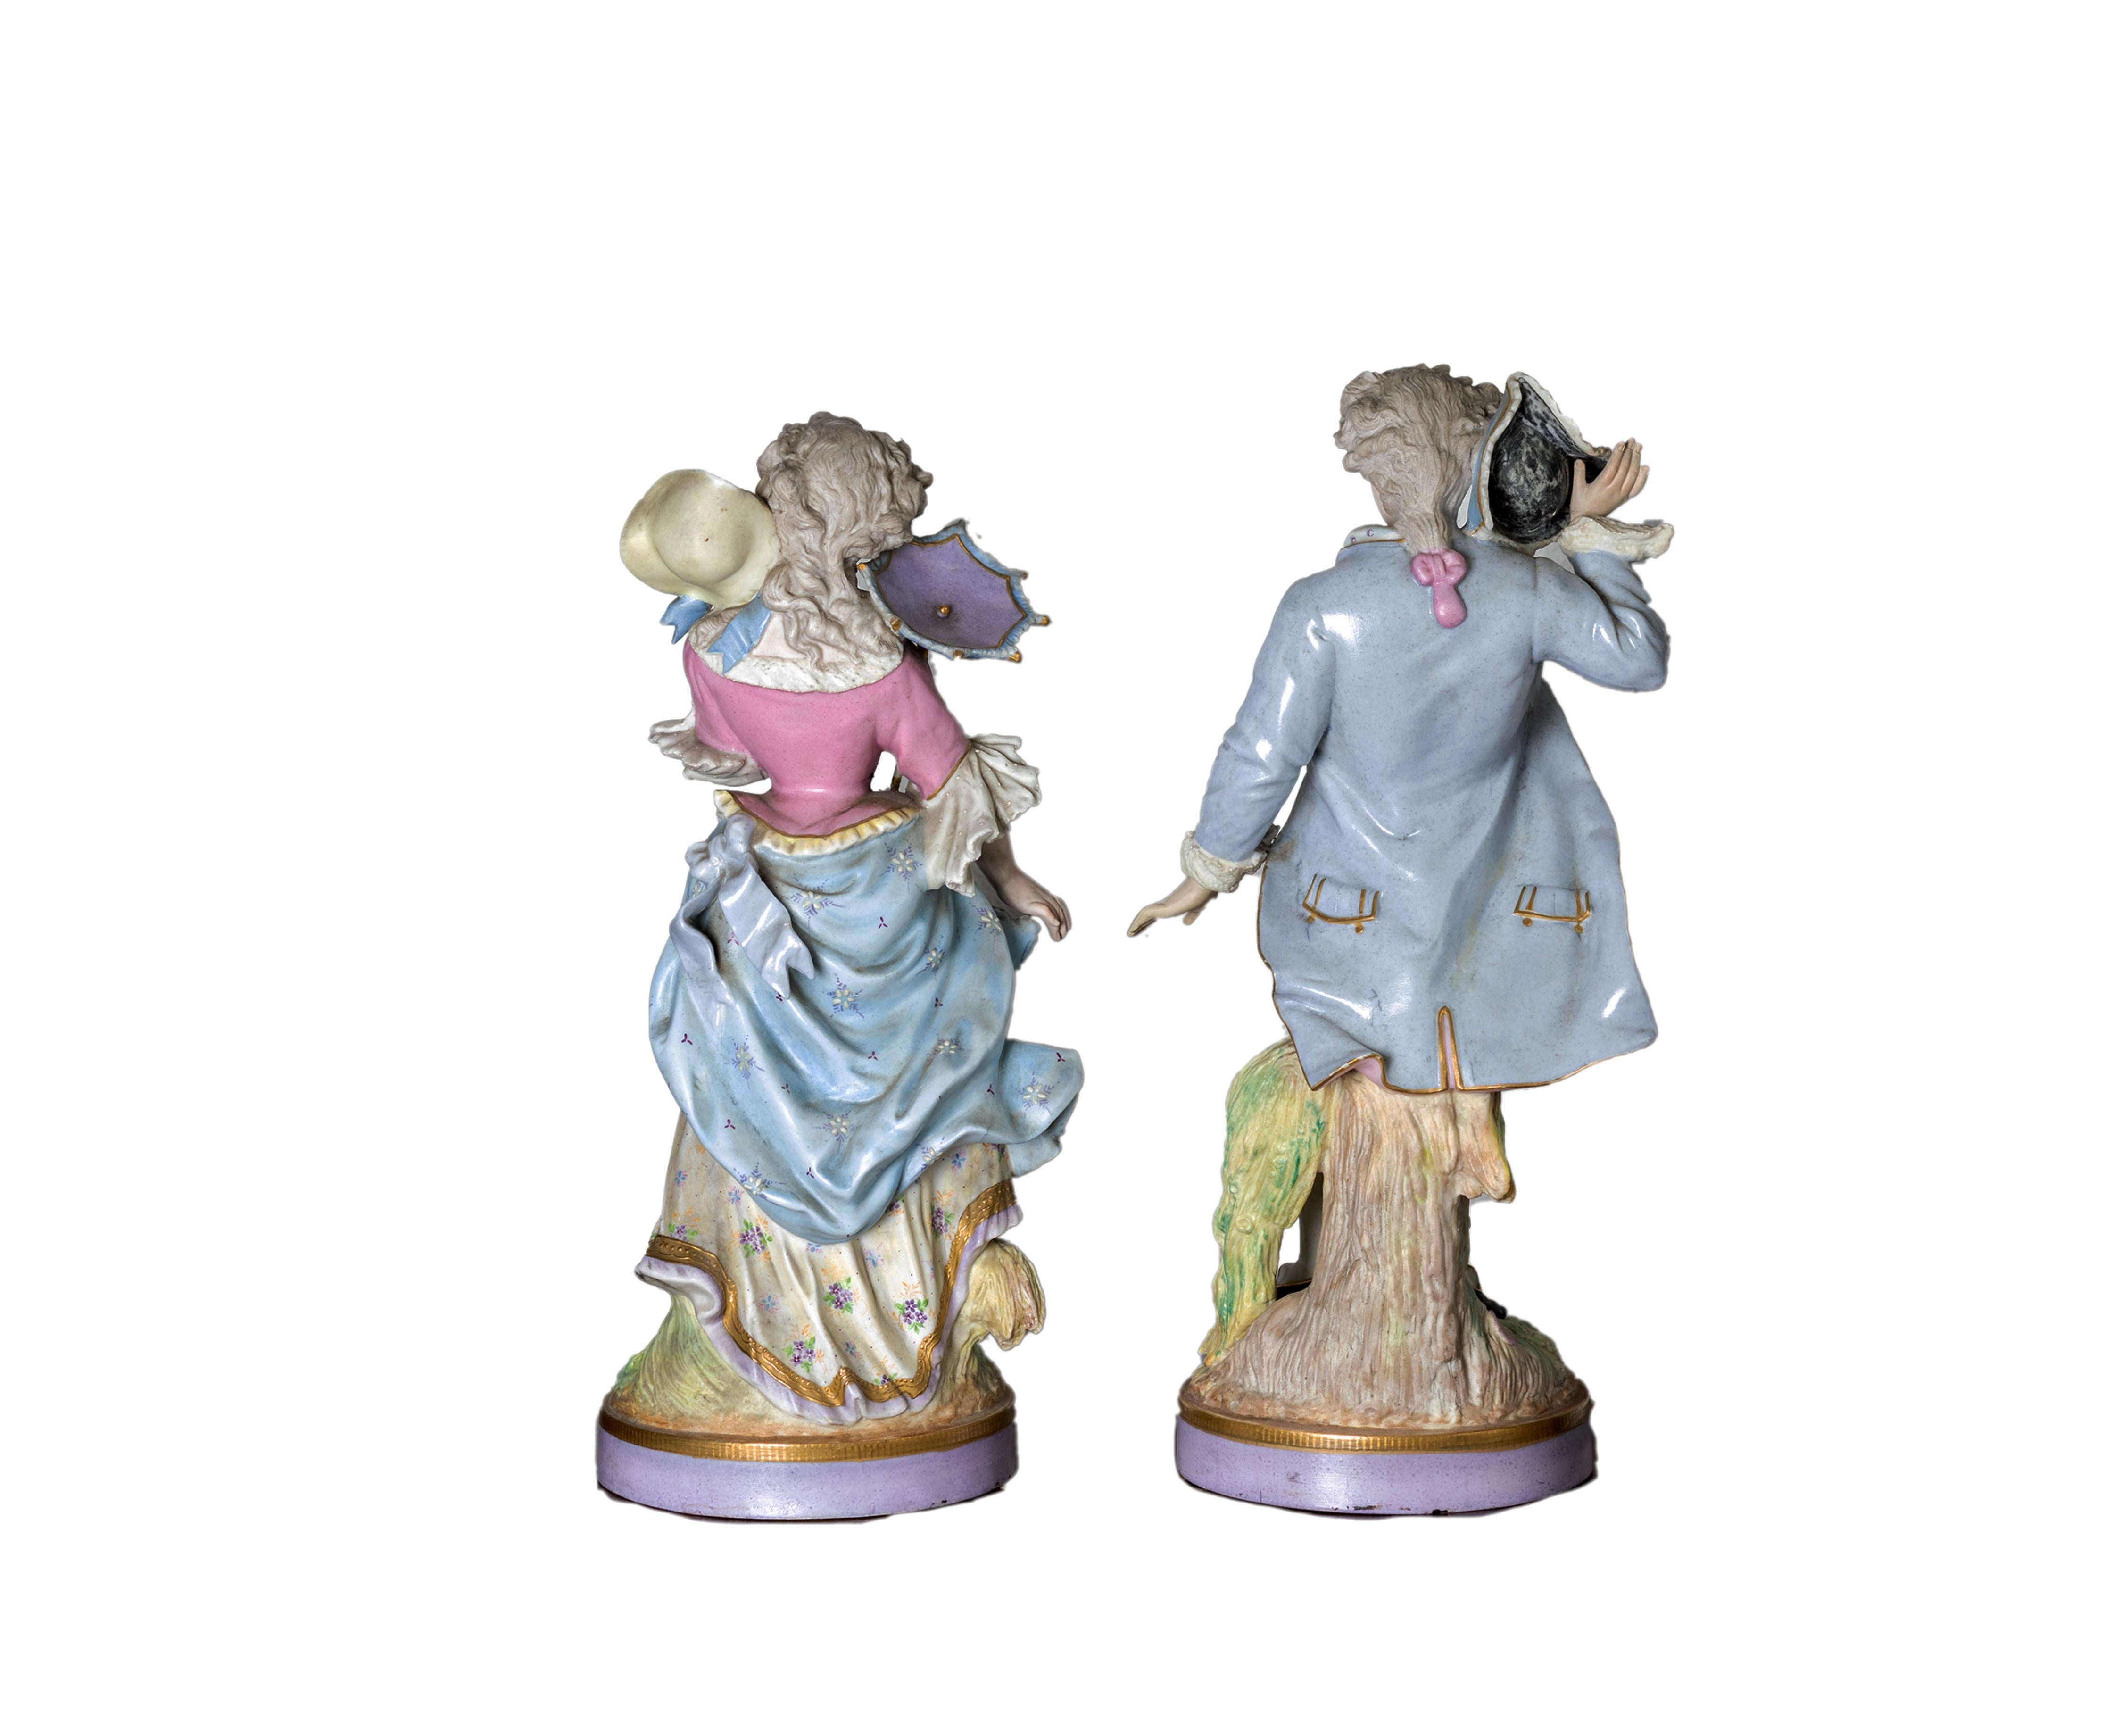 A noble baroque style porcelain figurine couple designed by Alpinien Margaine (French, active after 1854) by the foundry Gibus et Cie (1853–1972) in Limoges, France in a baby blue motif, signed «4 M), both piueces titled «Elégante à l'ombrelle^» and